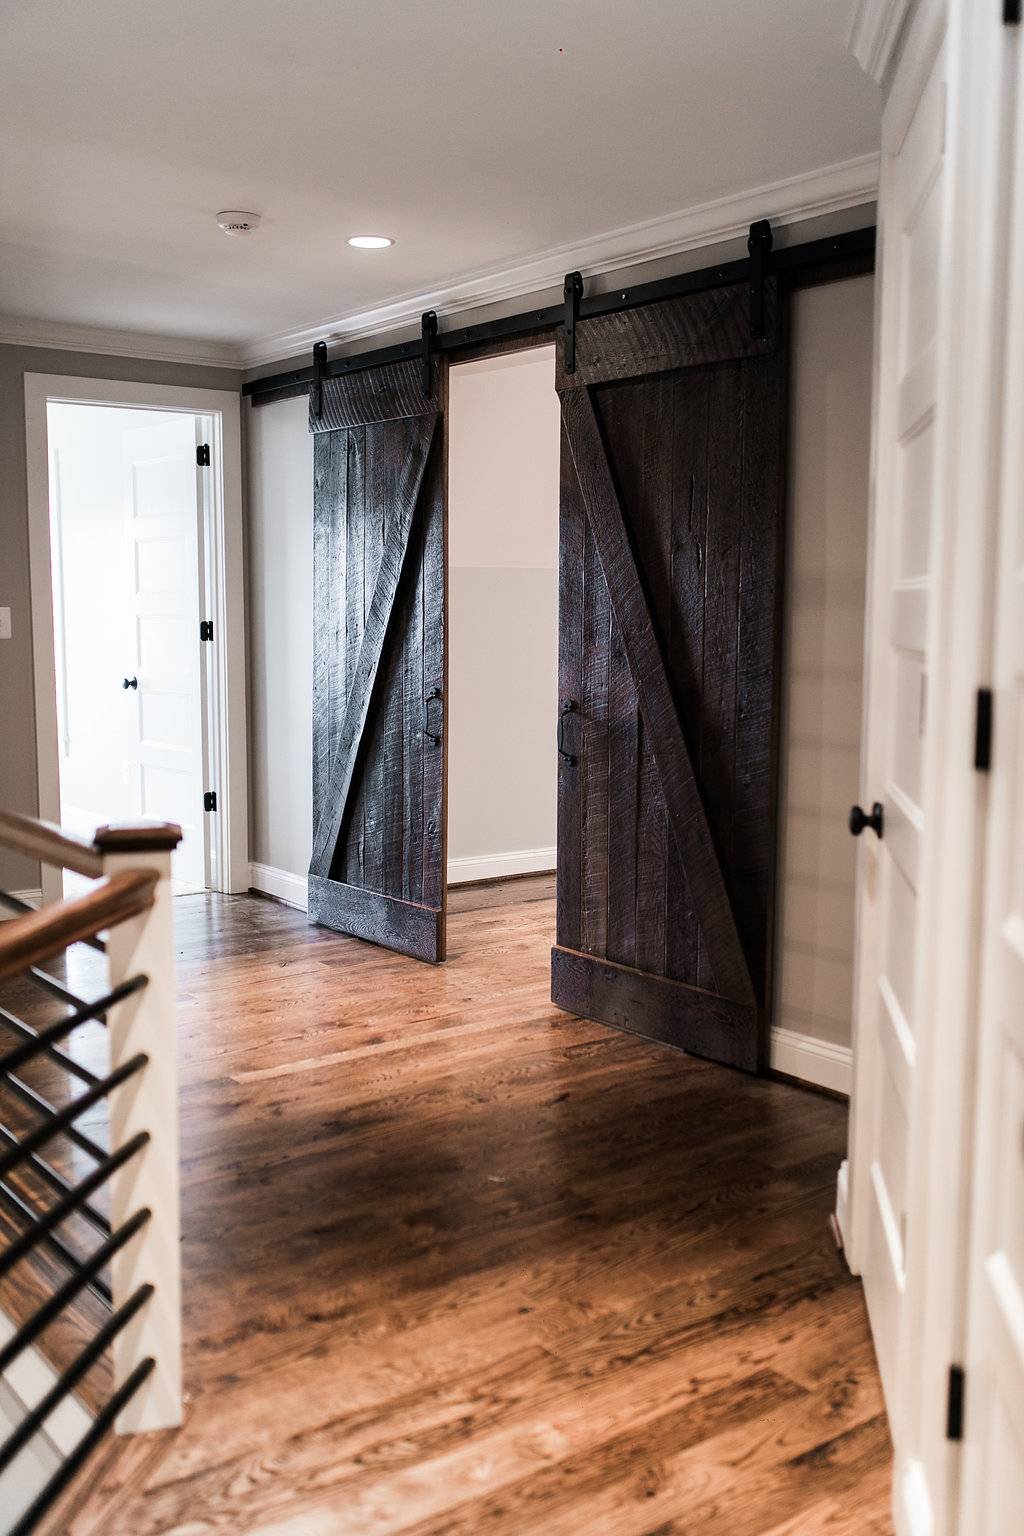 Image of Barn Door by Sawmill Designs